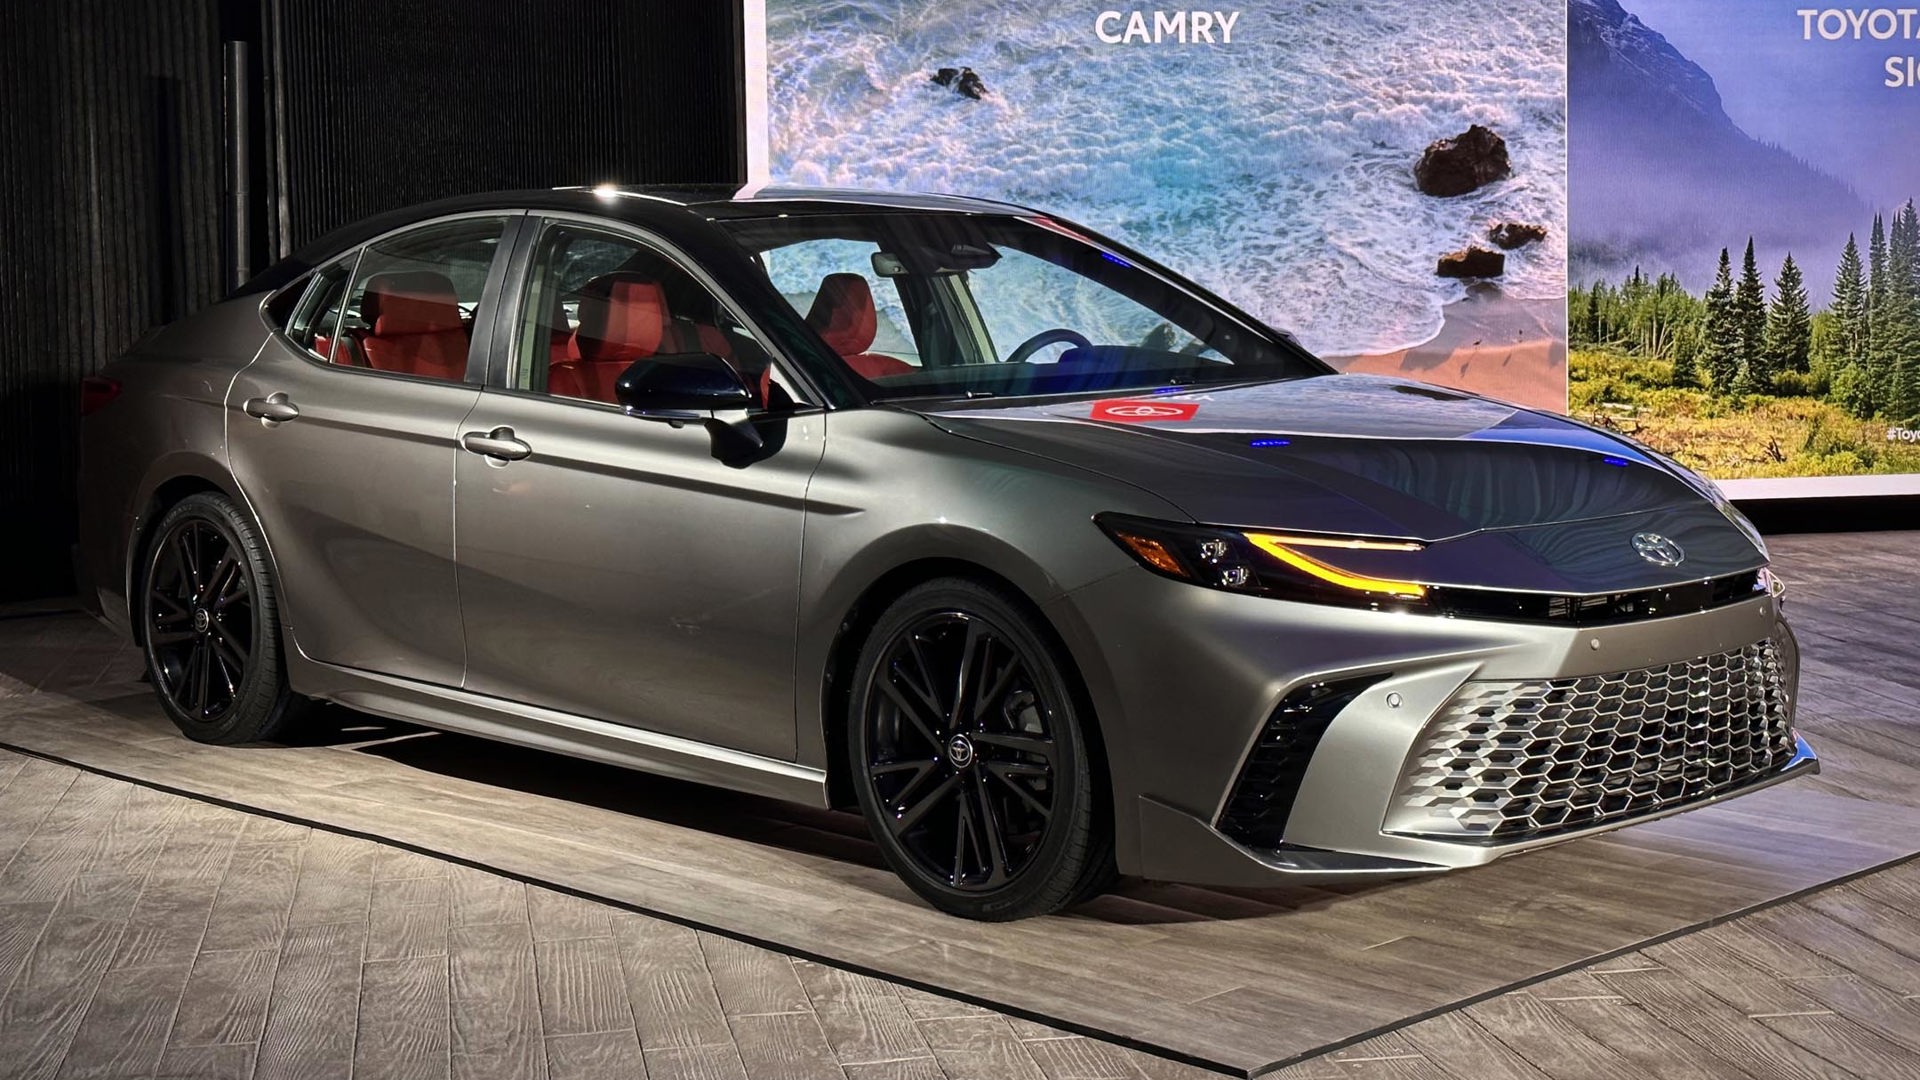 Toyota has unveiled a new campaign, developed using the company’s long-standing Total Toyota (T2) marketing model, to highlight the all-new, all-hybrid 2025 Camry.